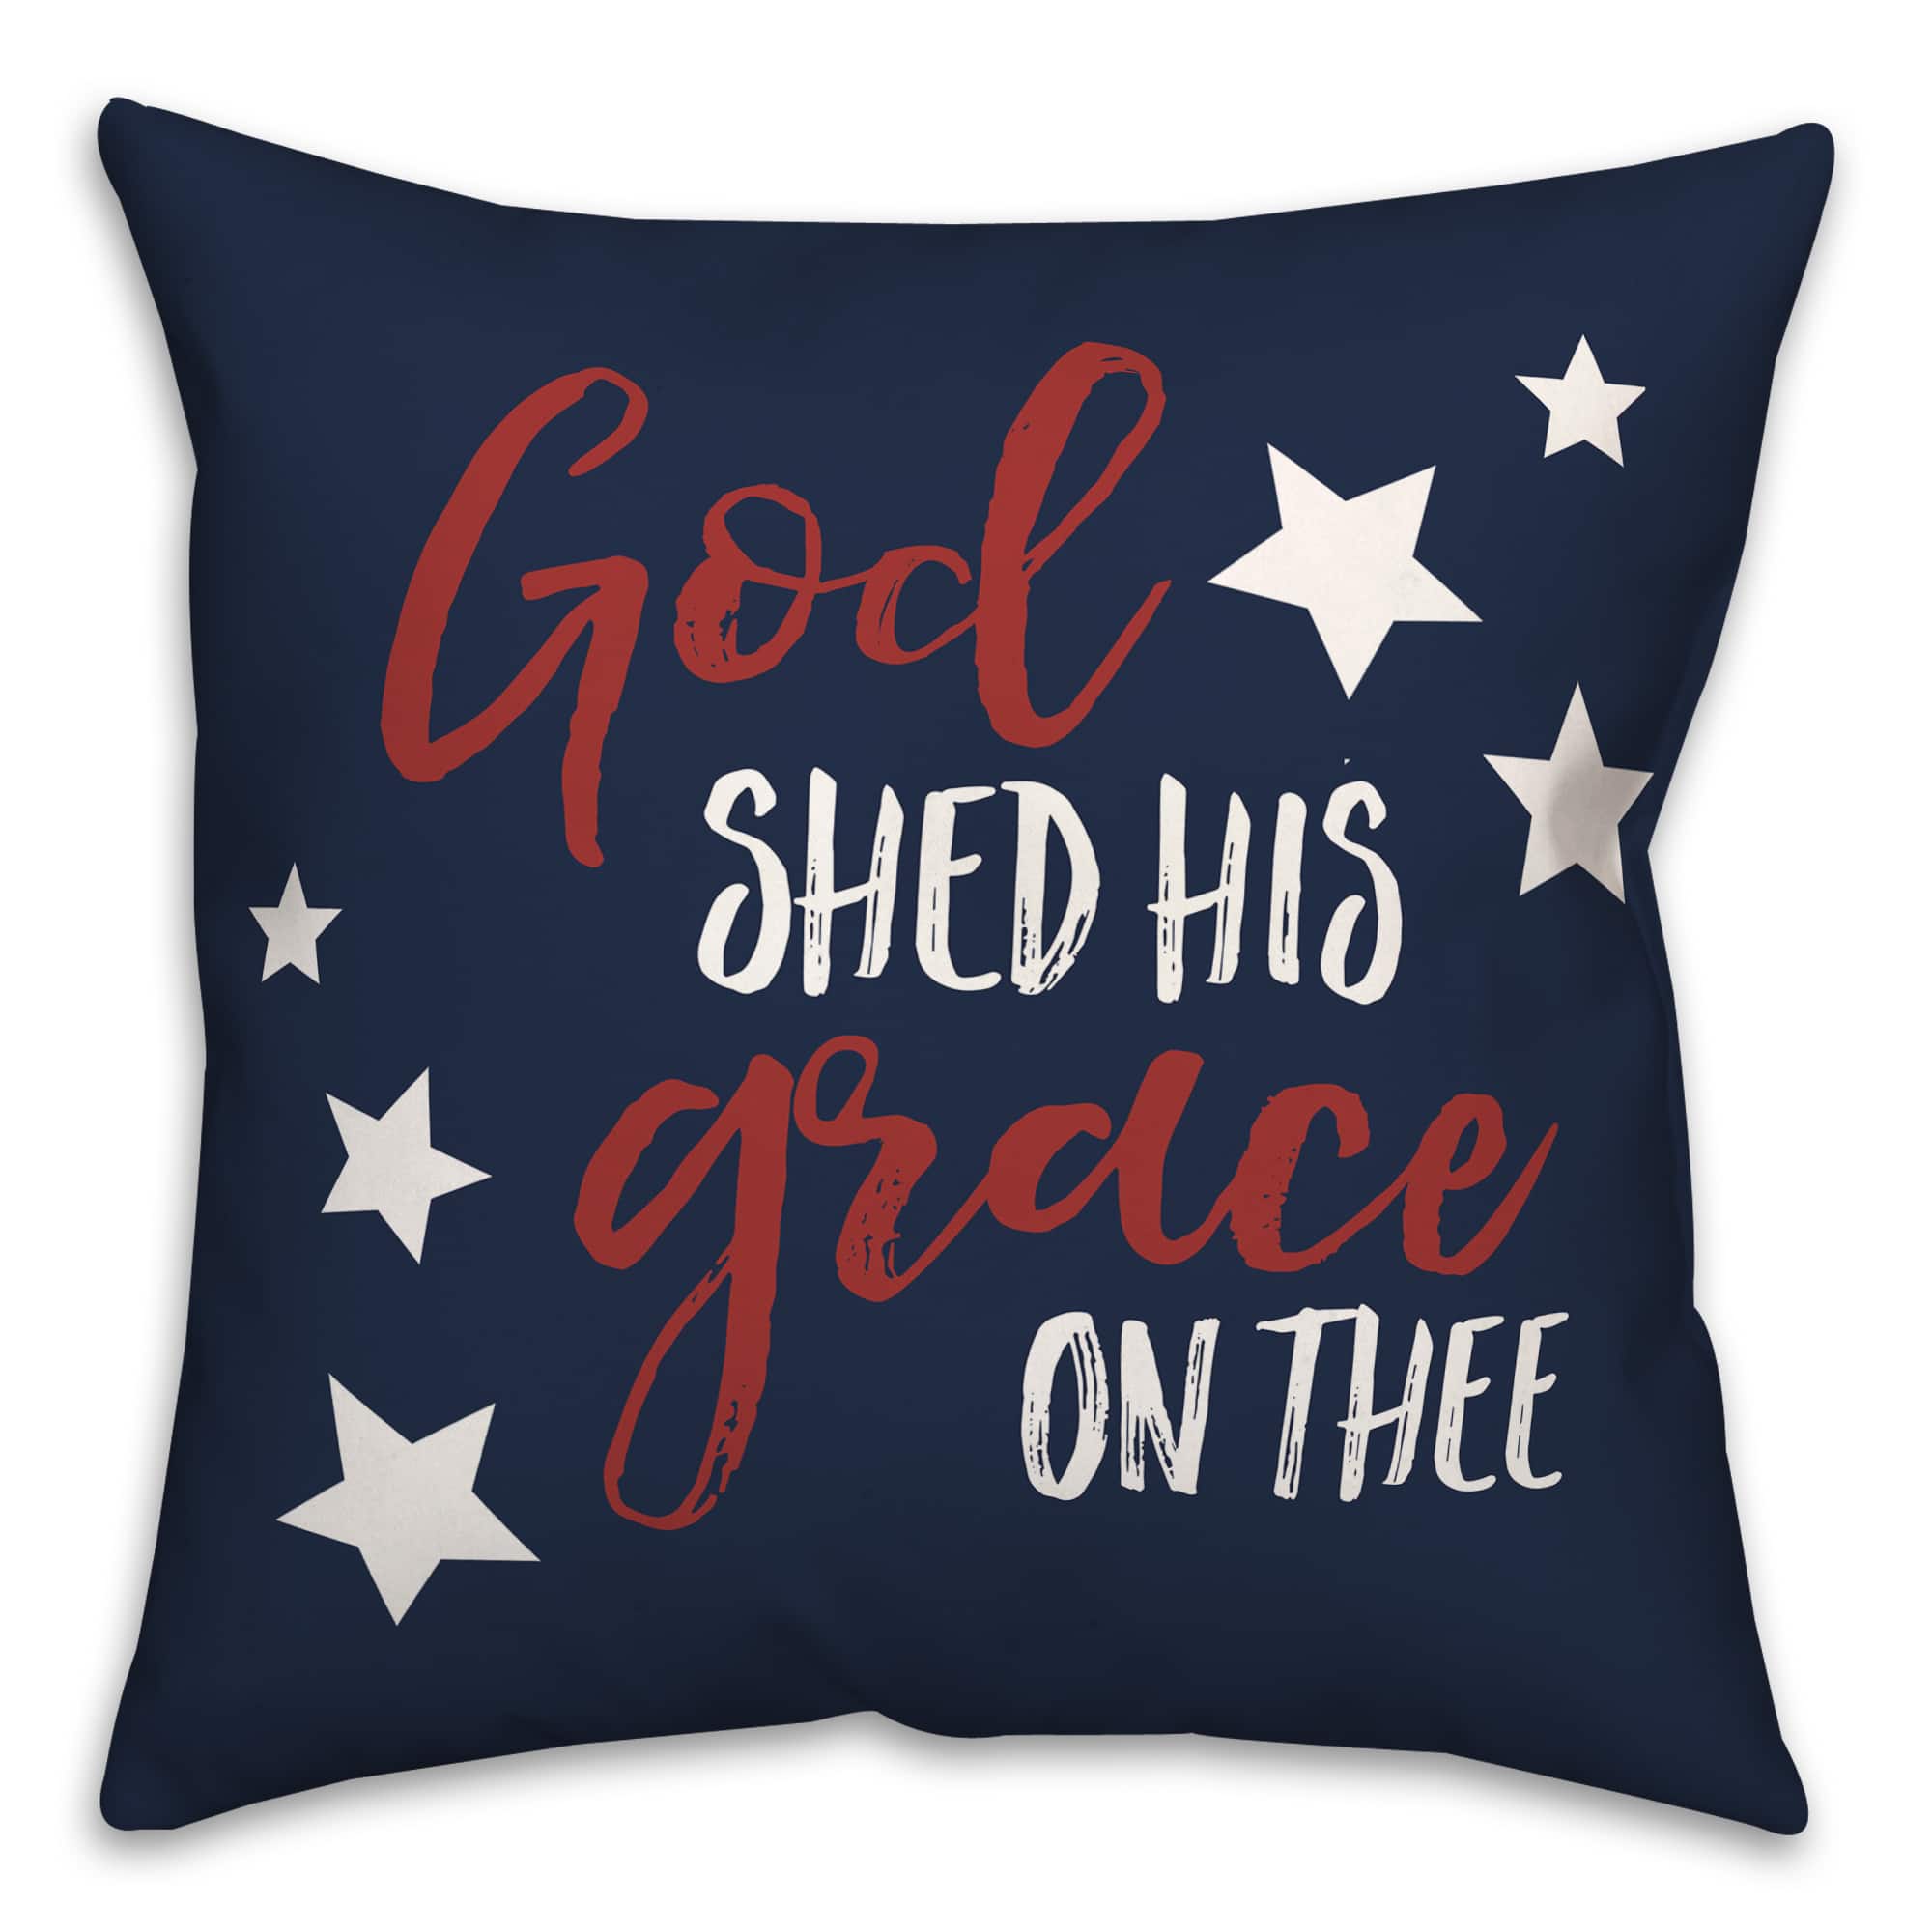 God Shed His Grace On Thee Throw Pillow